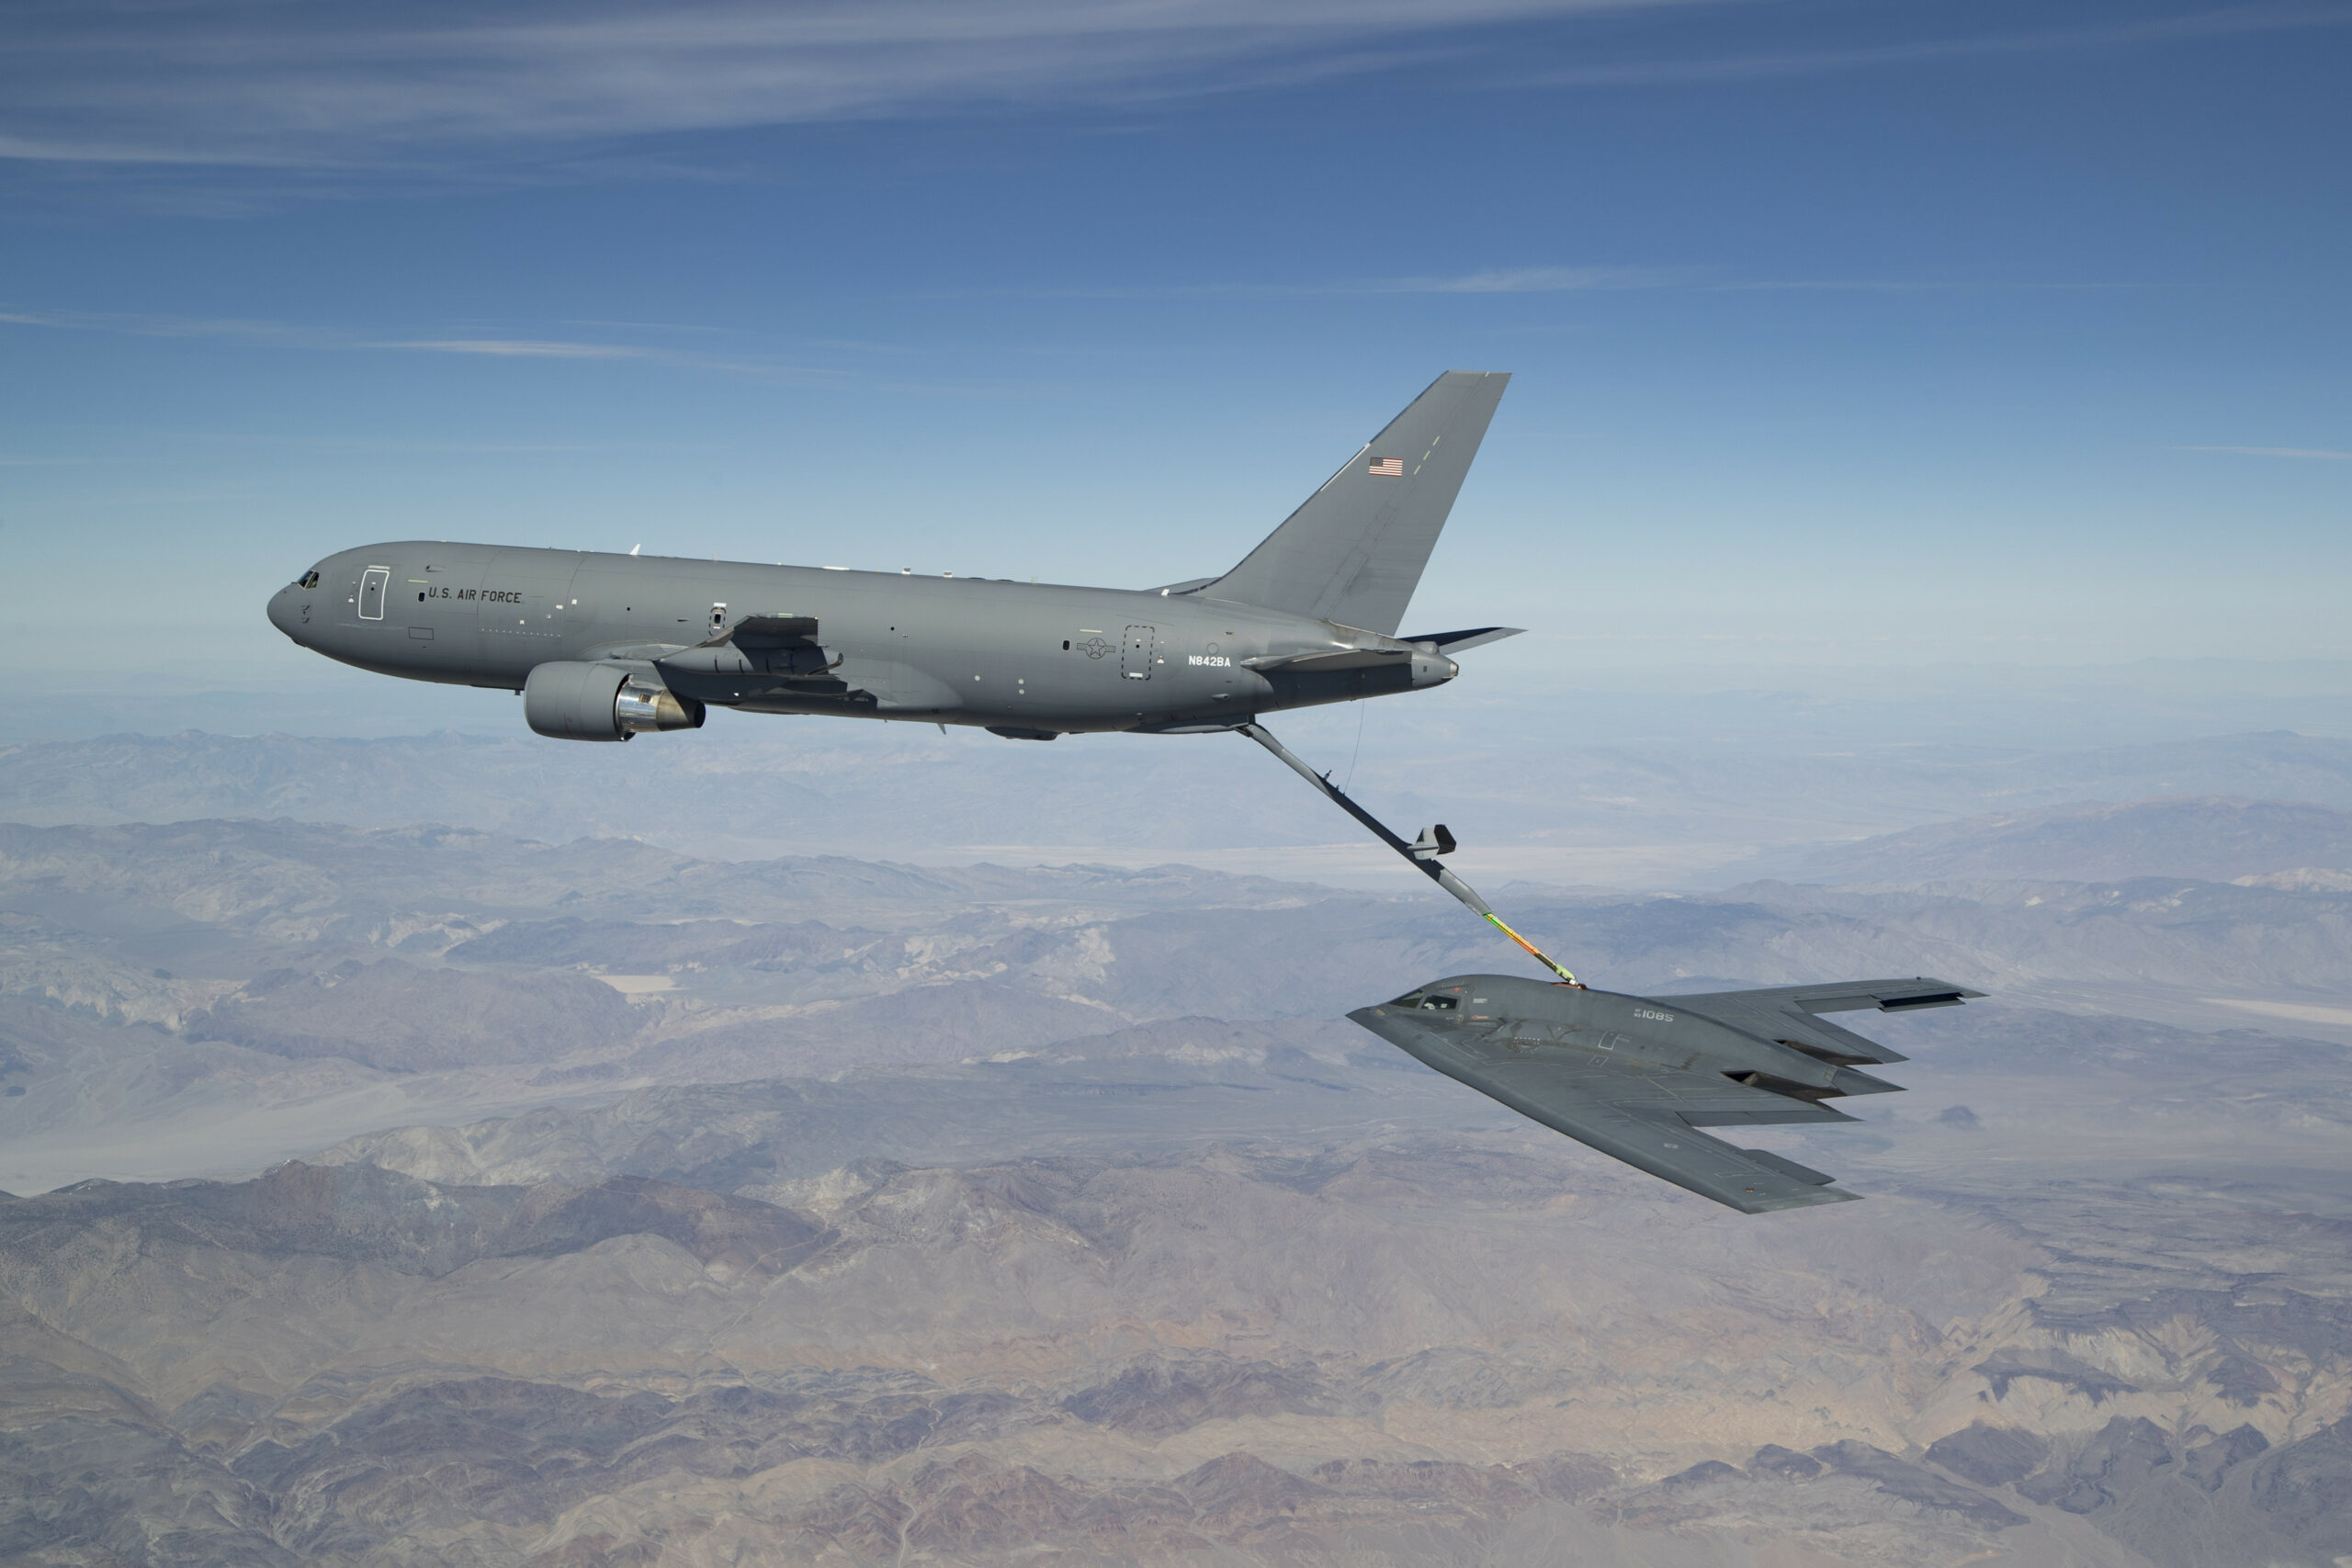 A KC-46 refuels the B-2 for the first time during developmental flight test over Edwards AFB and the Sierra Nevada Mountains in April 2019.